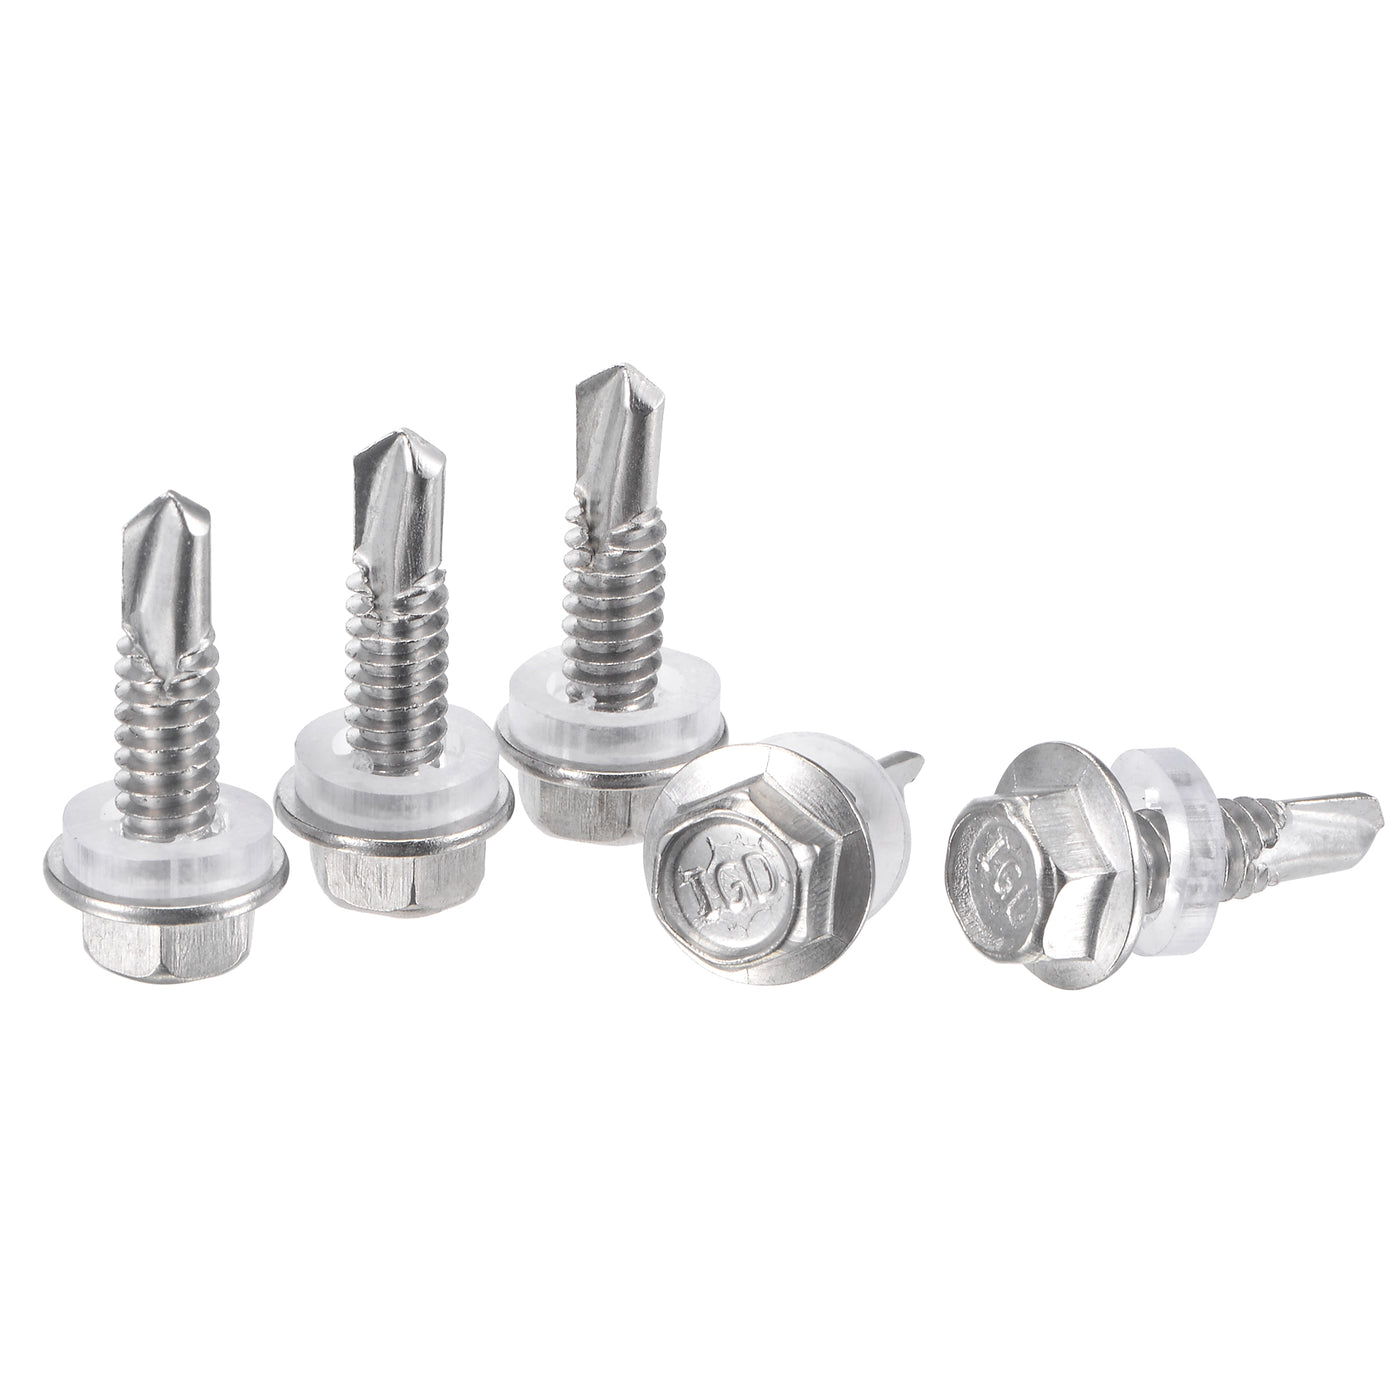 uxcell Uxcell #12 x 3/4" 410 Stainless Steel Hex Washer Head Self Drilling Screws 100pcs